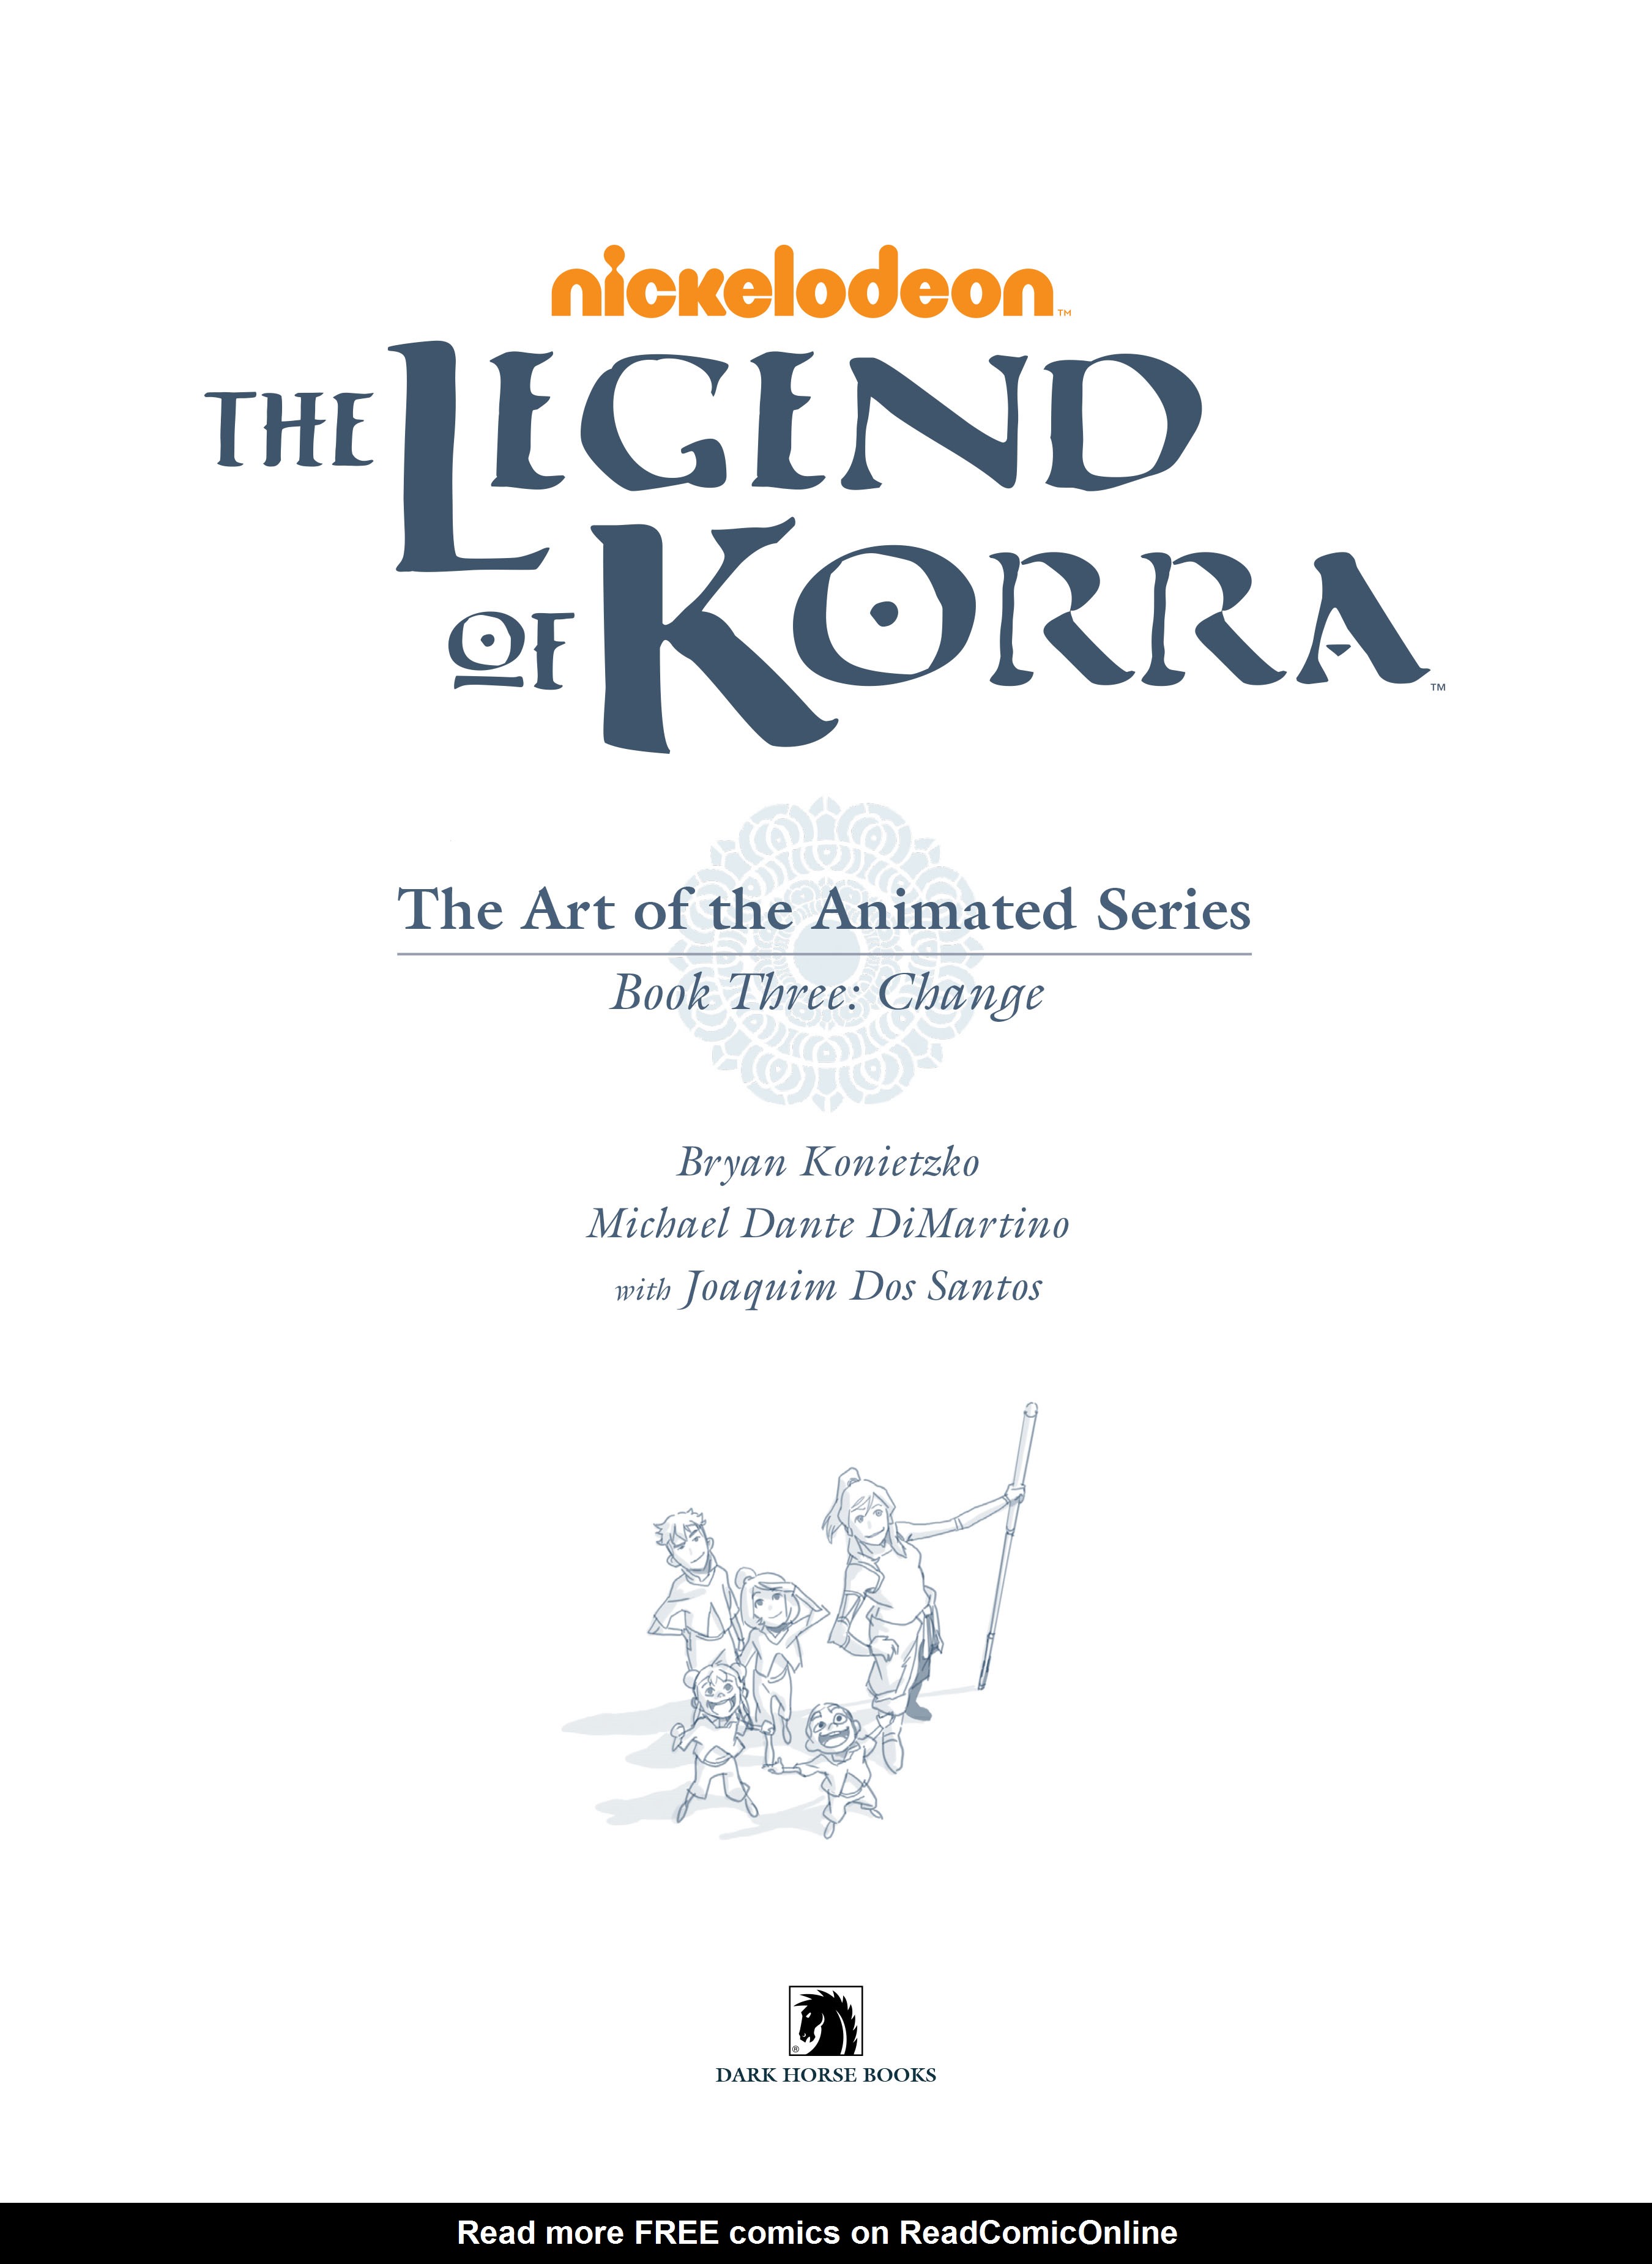 Read online The Legend of Korra: The Art of the Animated Series comic -  Issue # TPB 3 - 4